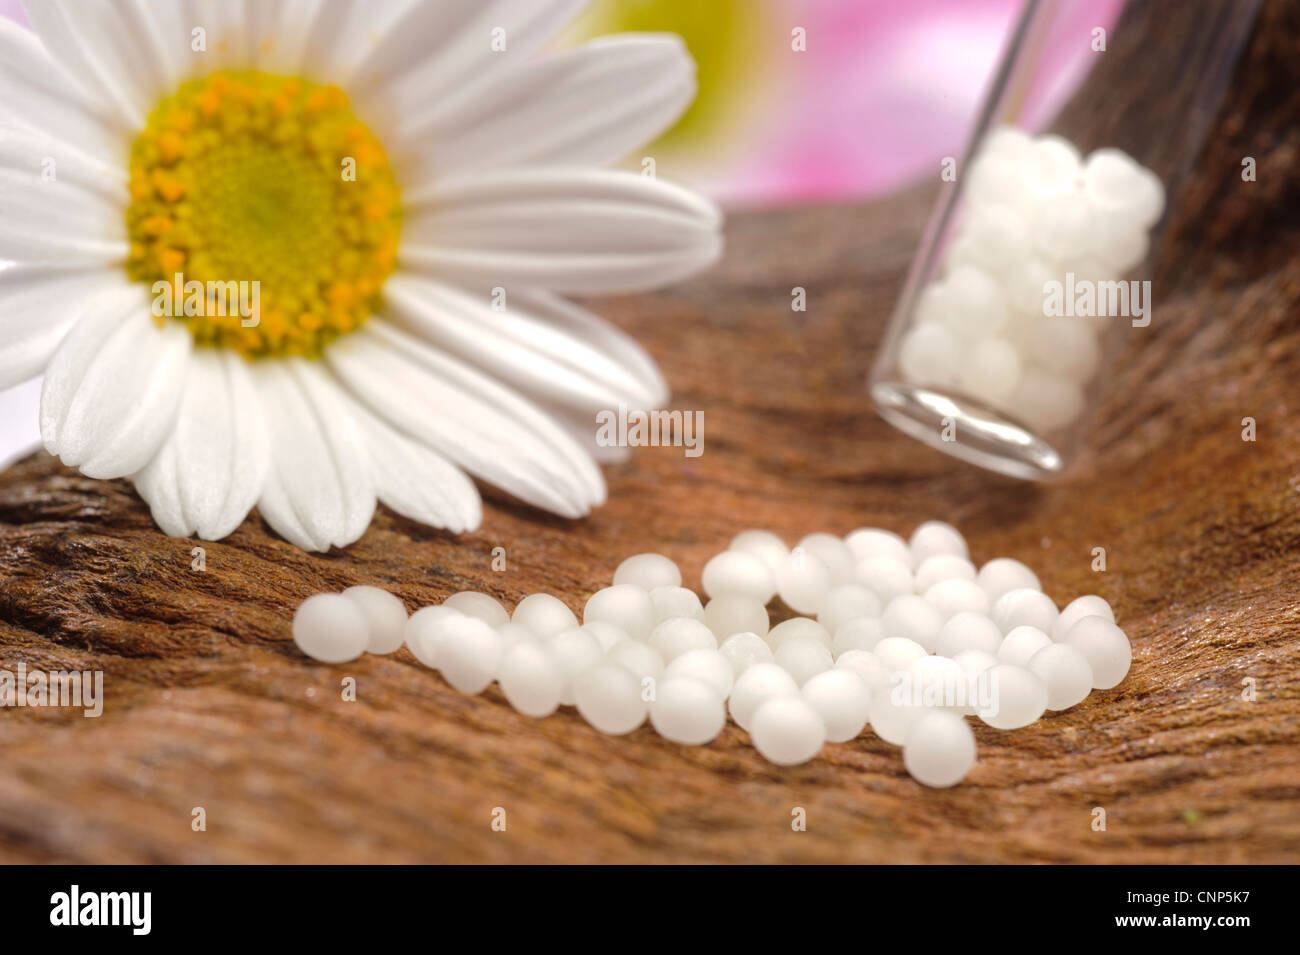 alternative medicine with homeopathy and globules Stock Photo